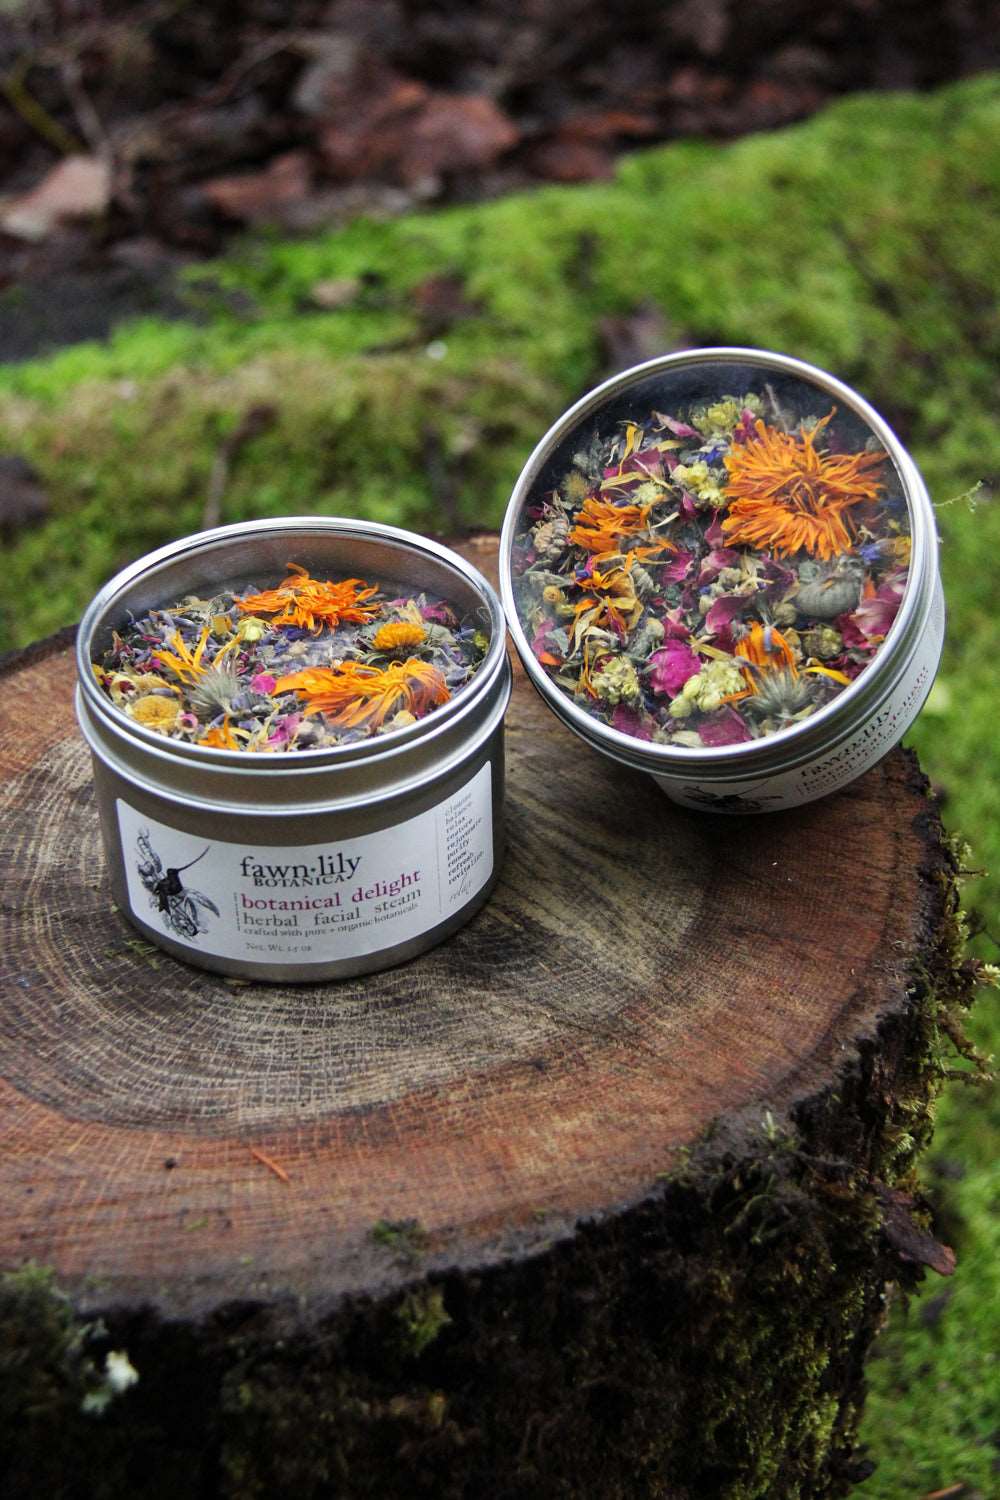 Botanical Delight Facial Steam | Fawn Lily Botanica - A beautiful, relaxing, floral facial steam designed to naturally moisturize, cleanse, purify, relax muscles, and stimulate circulation for fresh, radiant skin!